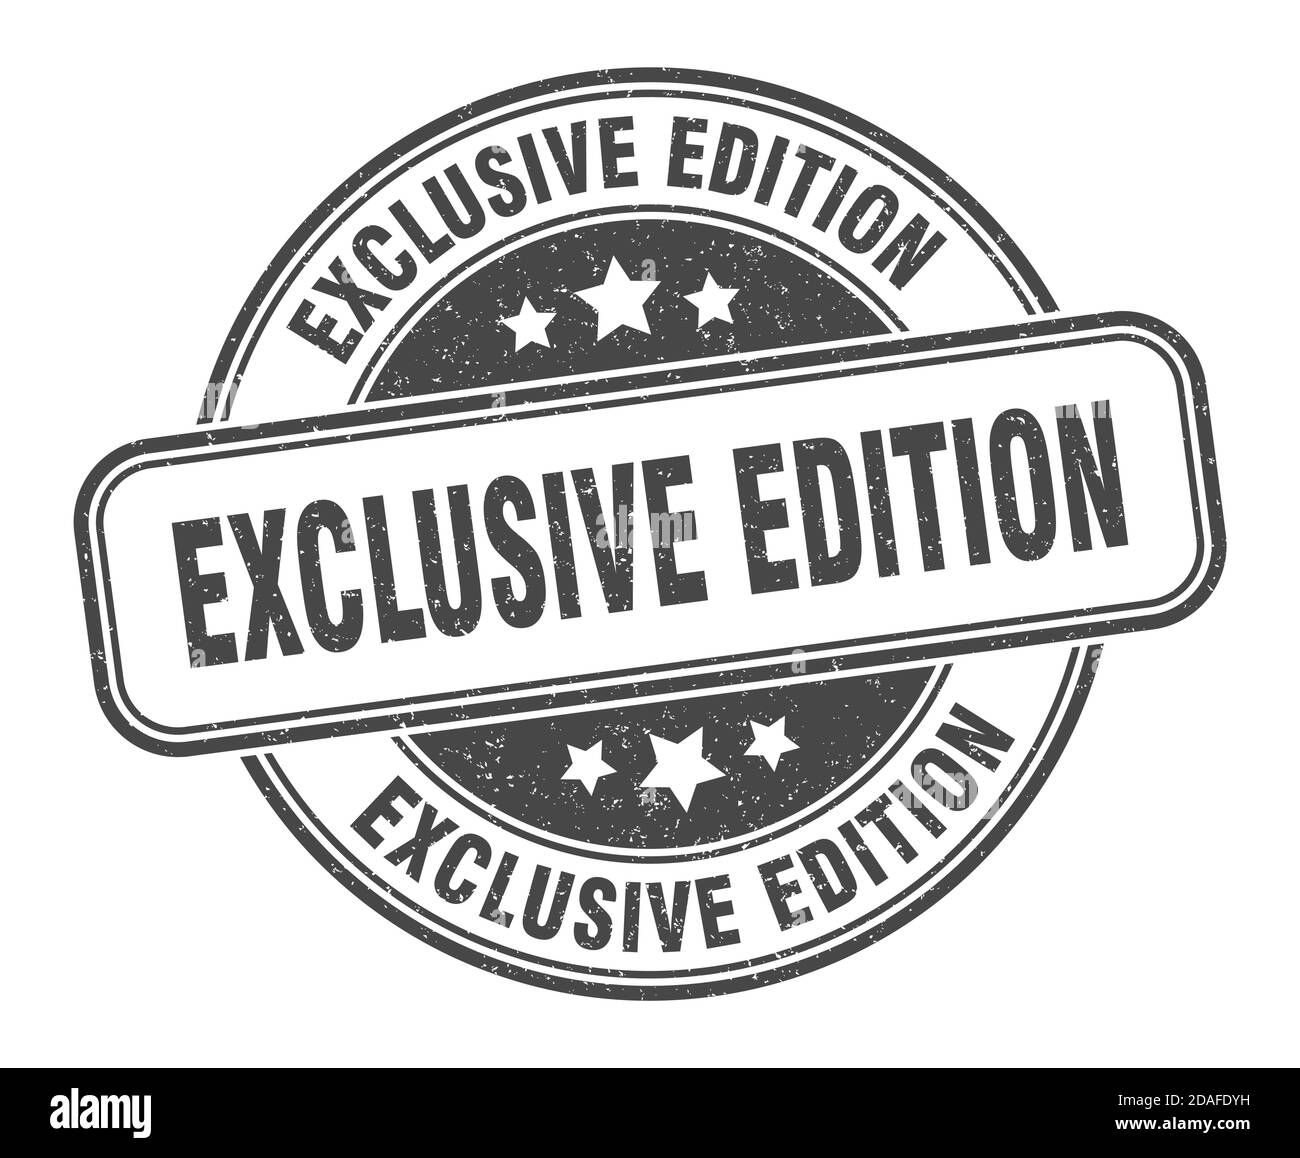 exclusive edition stamp. exclusive edition sign. round grunge label Stock Vector